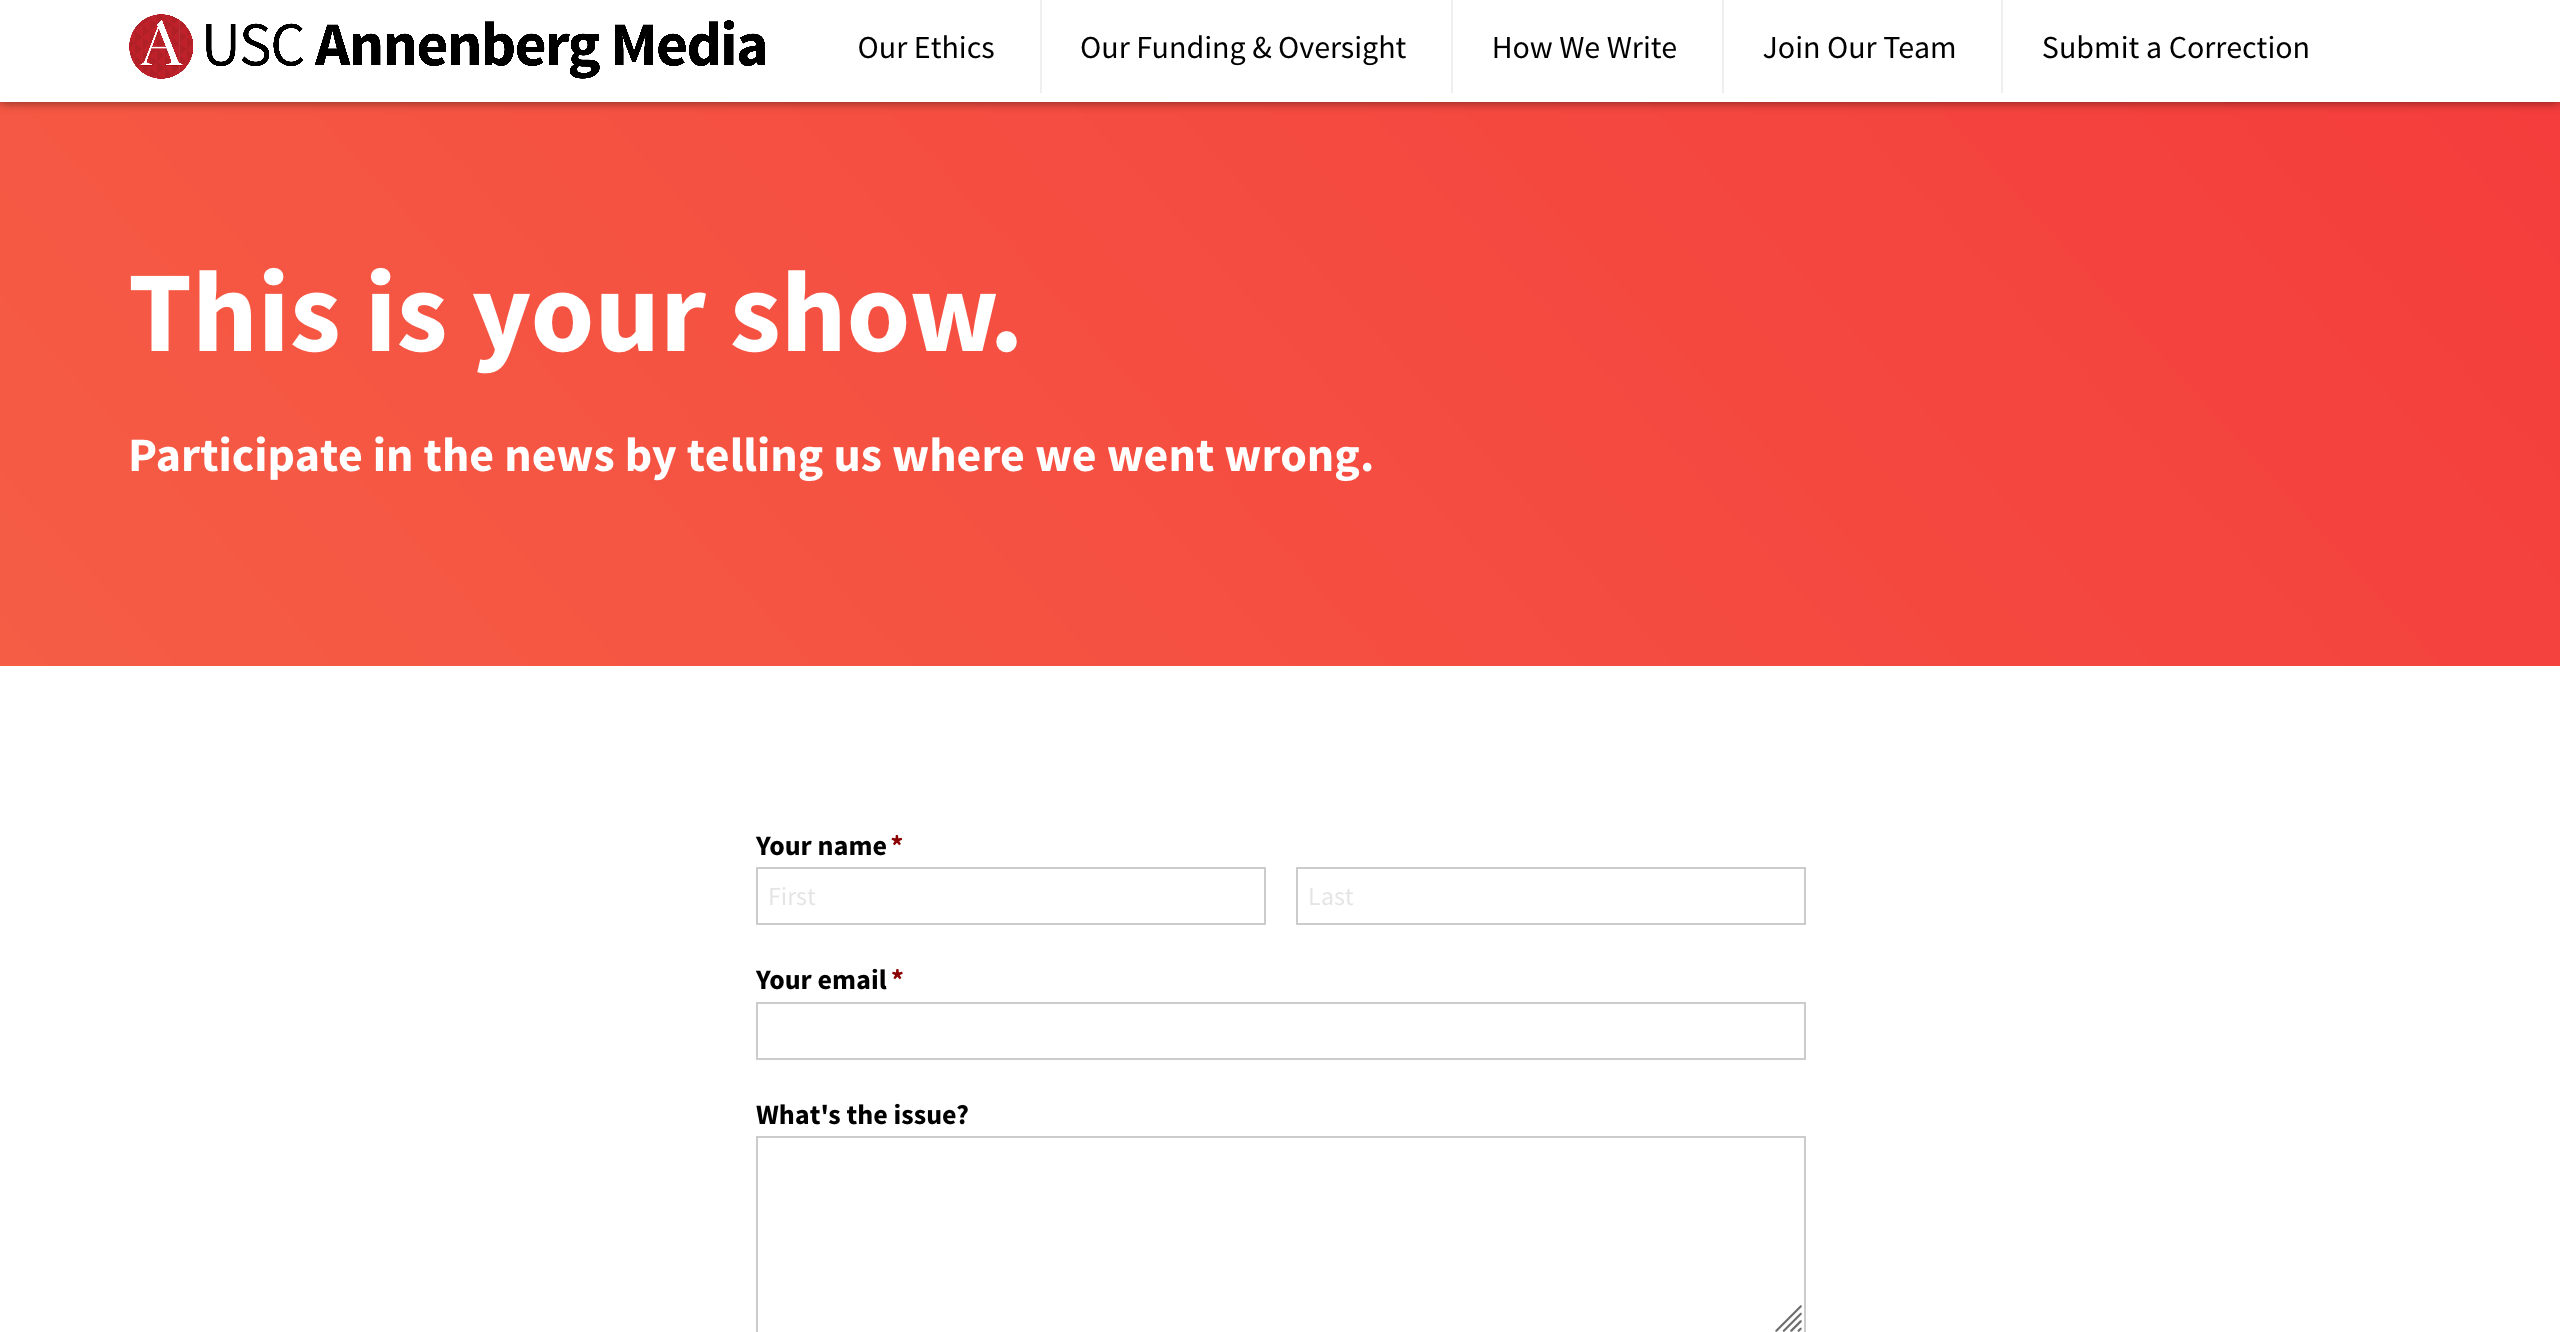 A screenshot of a webpage where users can submit a correction to Annenberg Media.